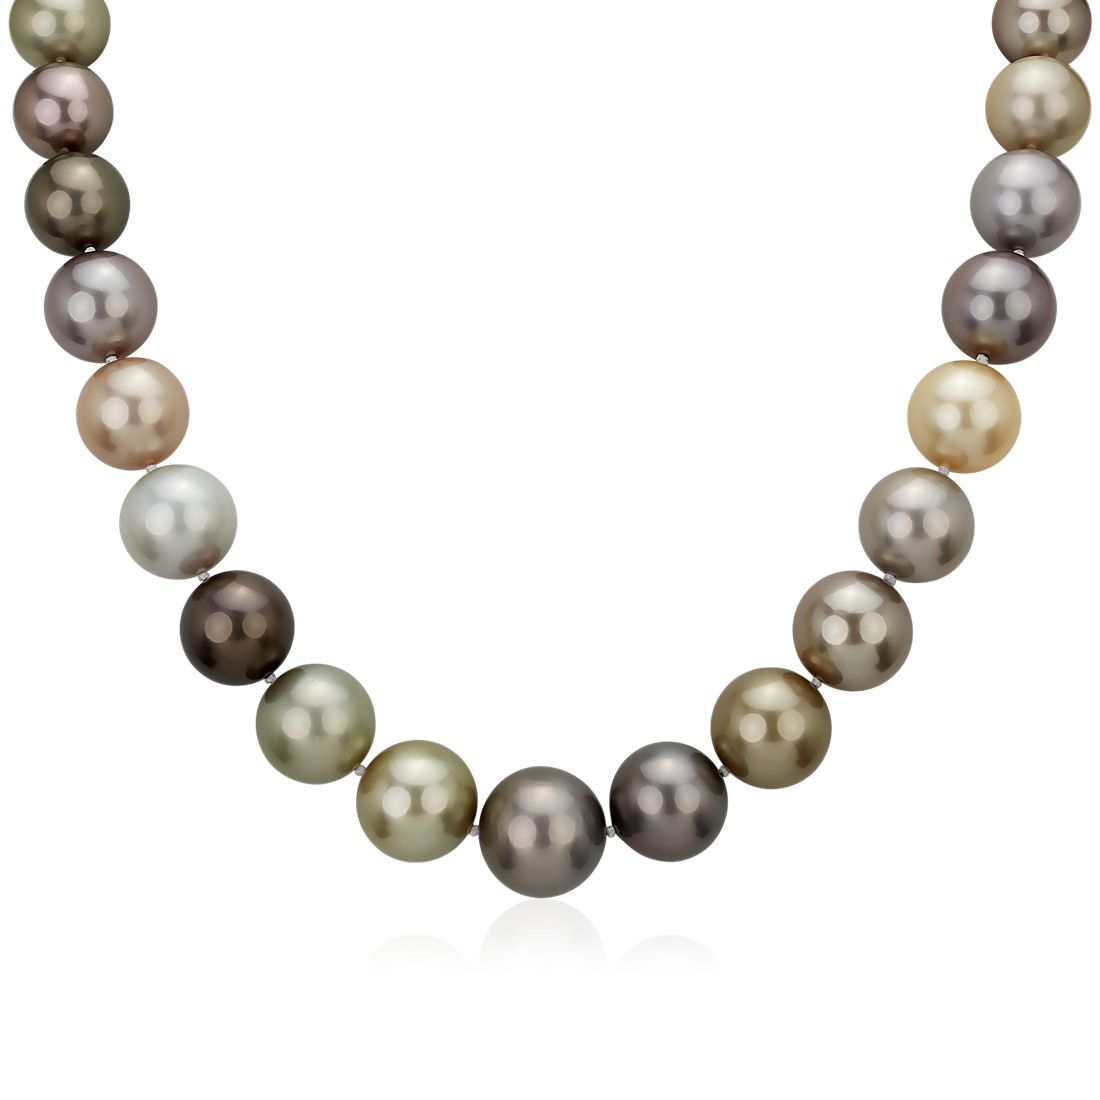 12-15mm Multi-Color Tahitian Pearl Strand Necklace with Diamond Clasp